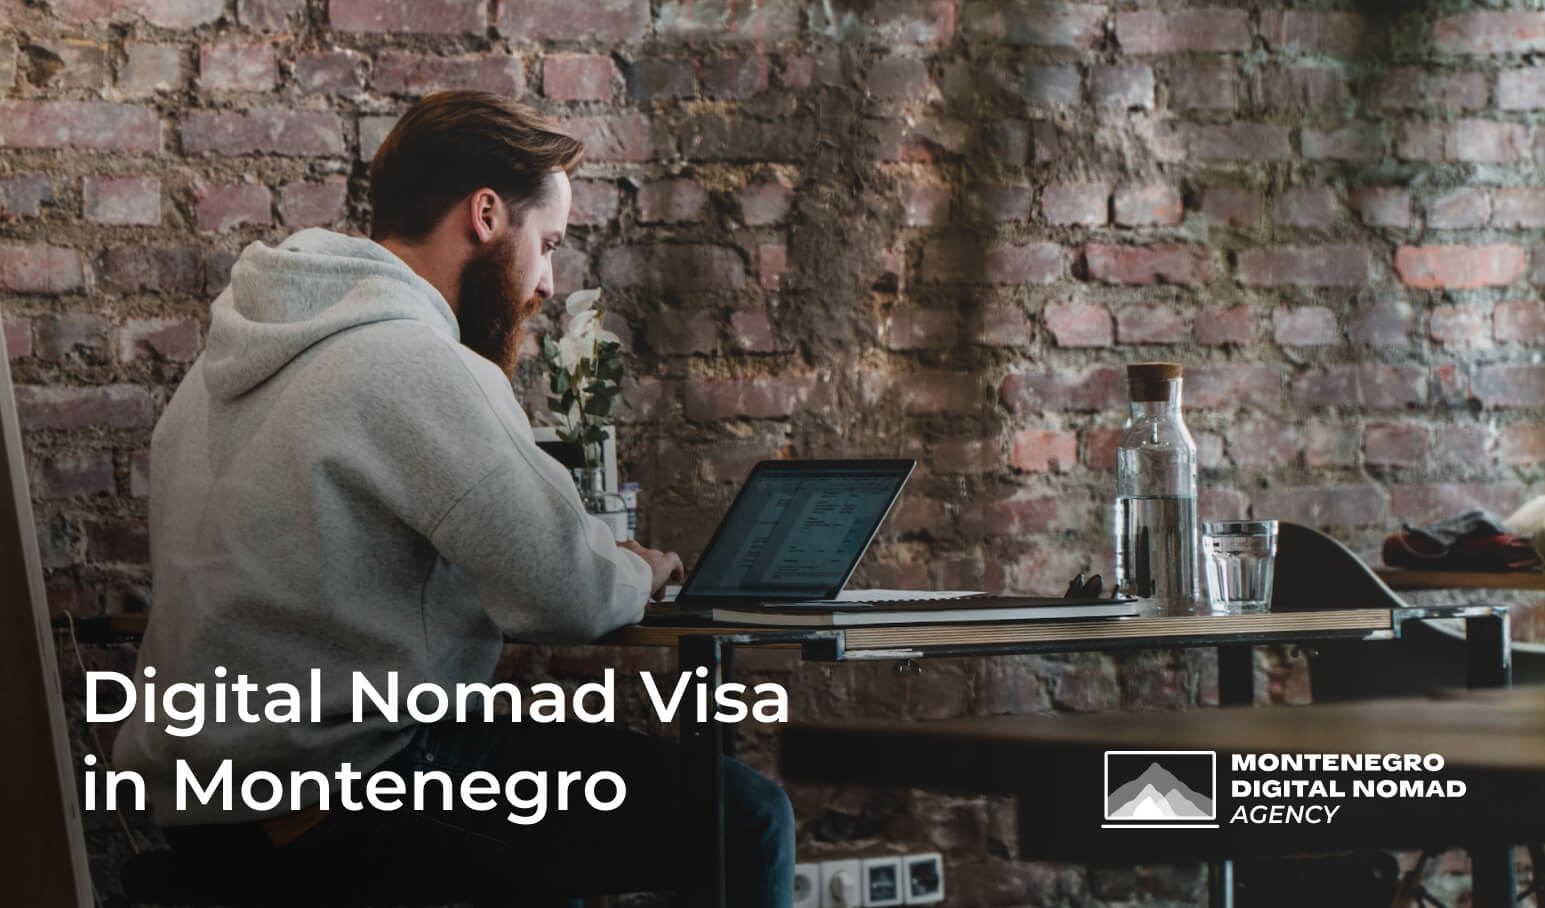 Image of digital nomad in a cafe. Text overlay reads - Digital Nomad Visa in Montenegro